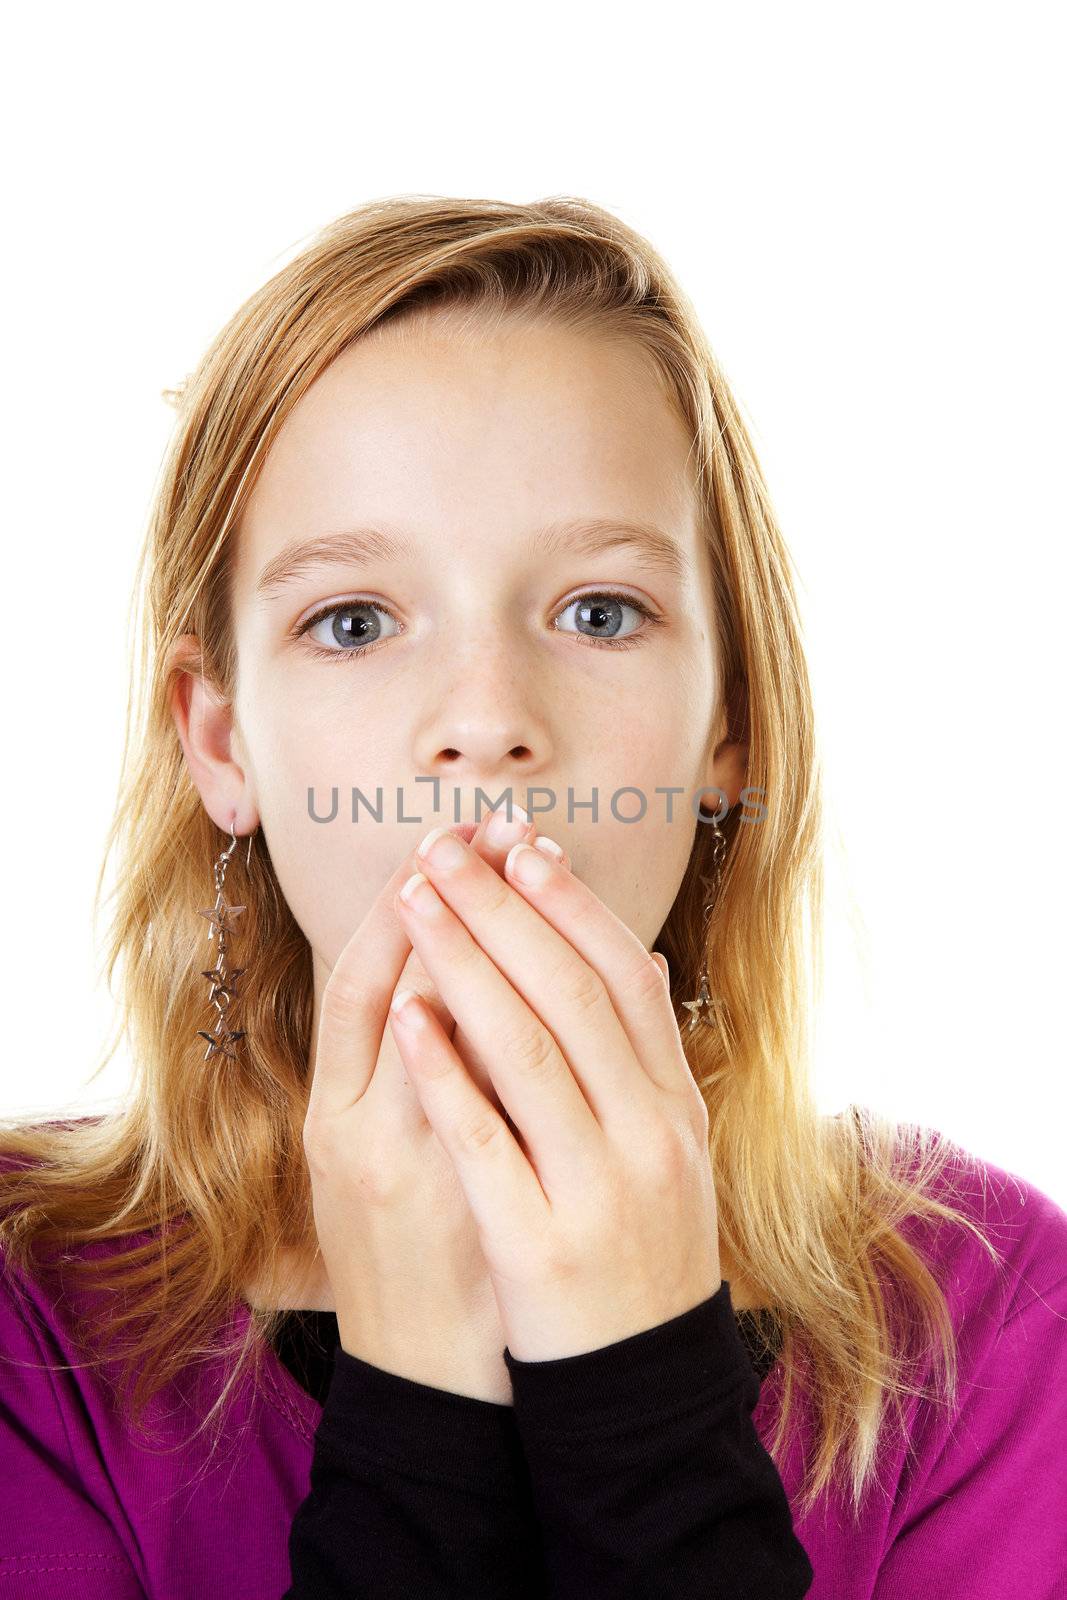 Girl looks surprised with hands to mouth over white background